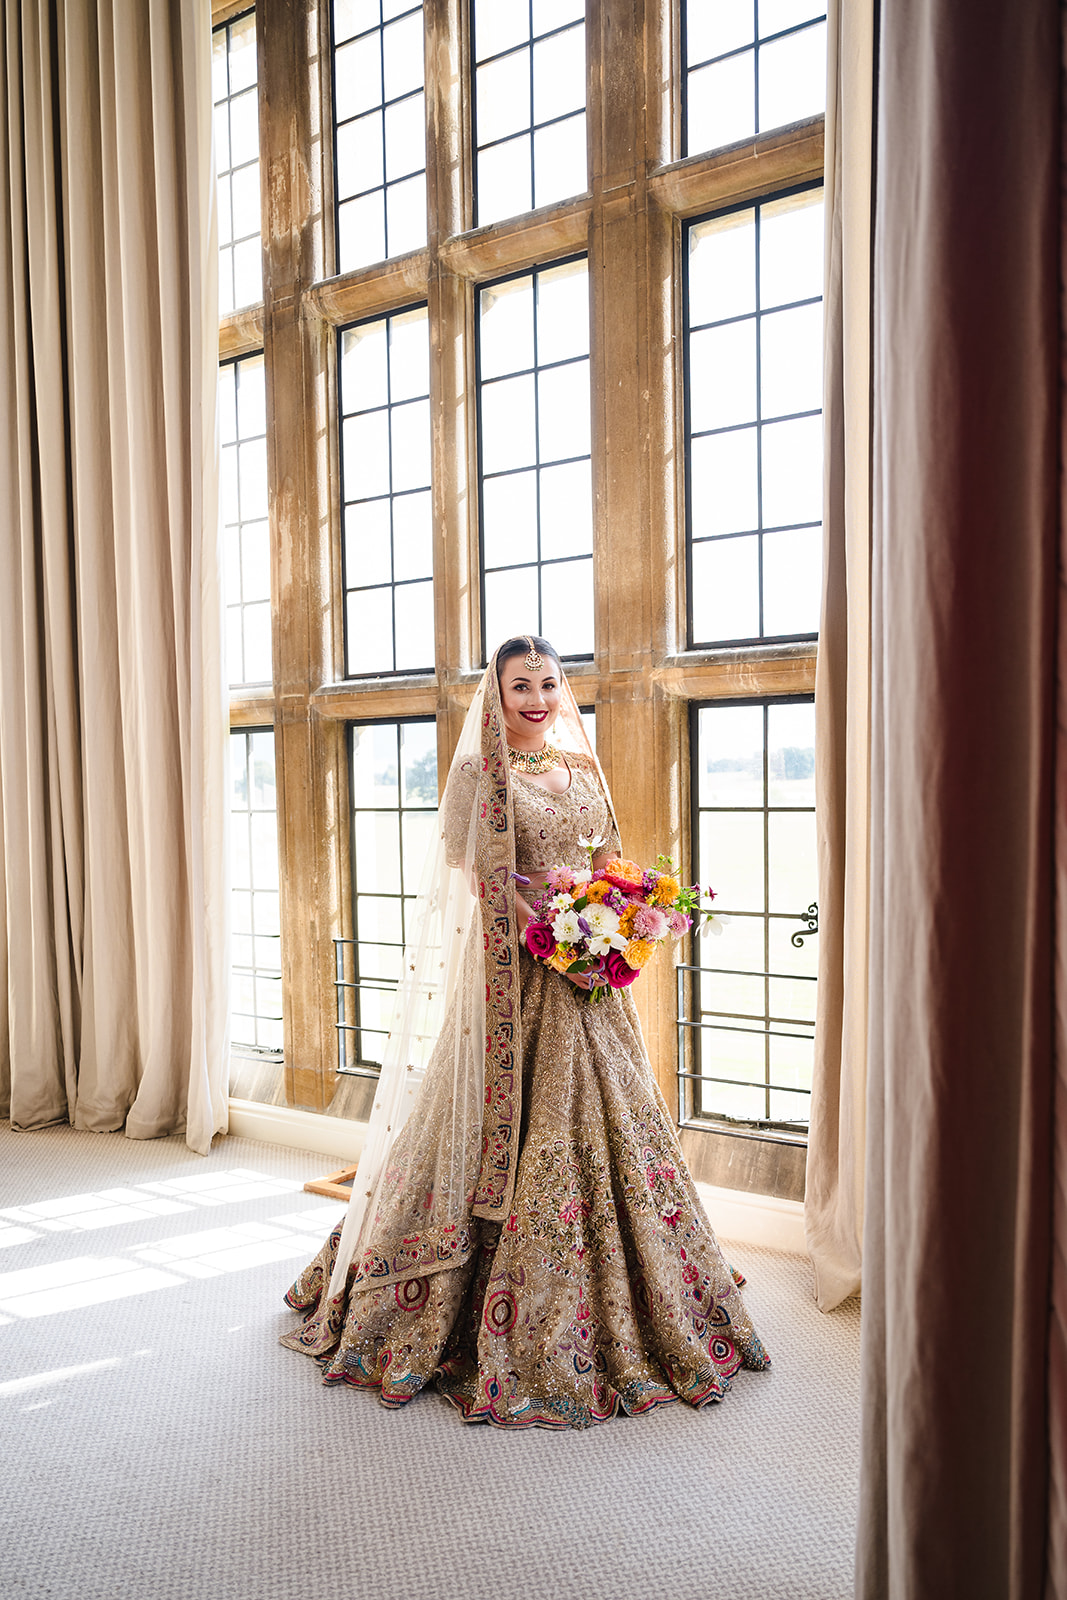 Indian Summer wedding at Stapleford park bride in her dress portrait in thebridal suite by Amanda Forman Photography